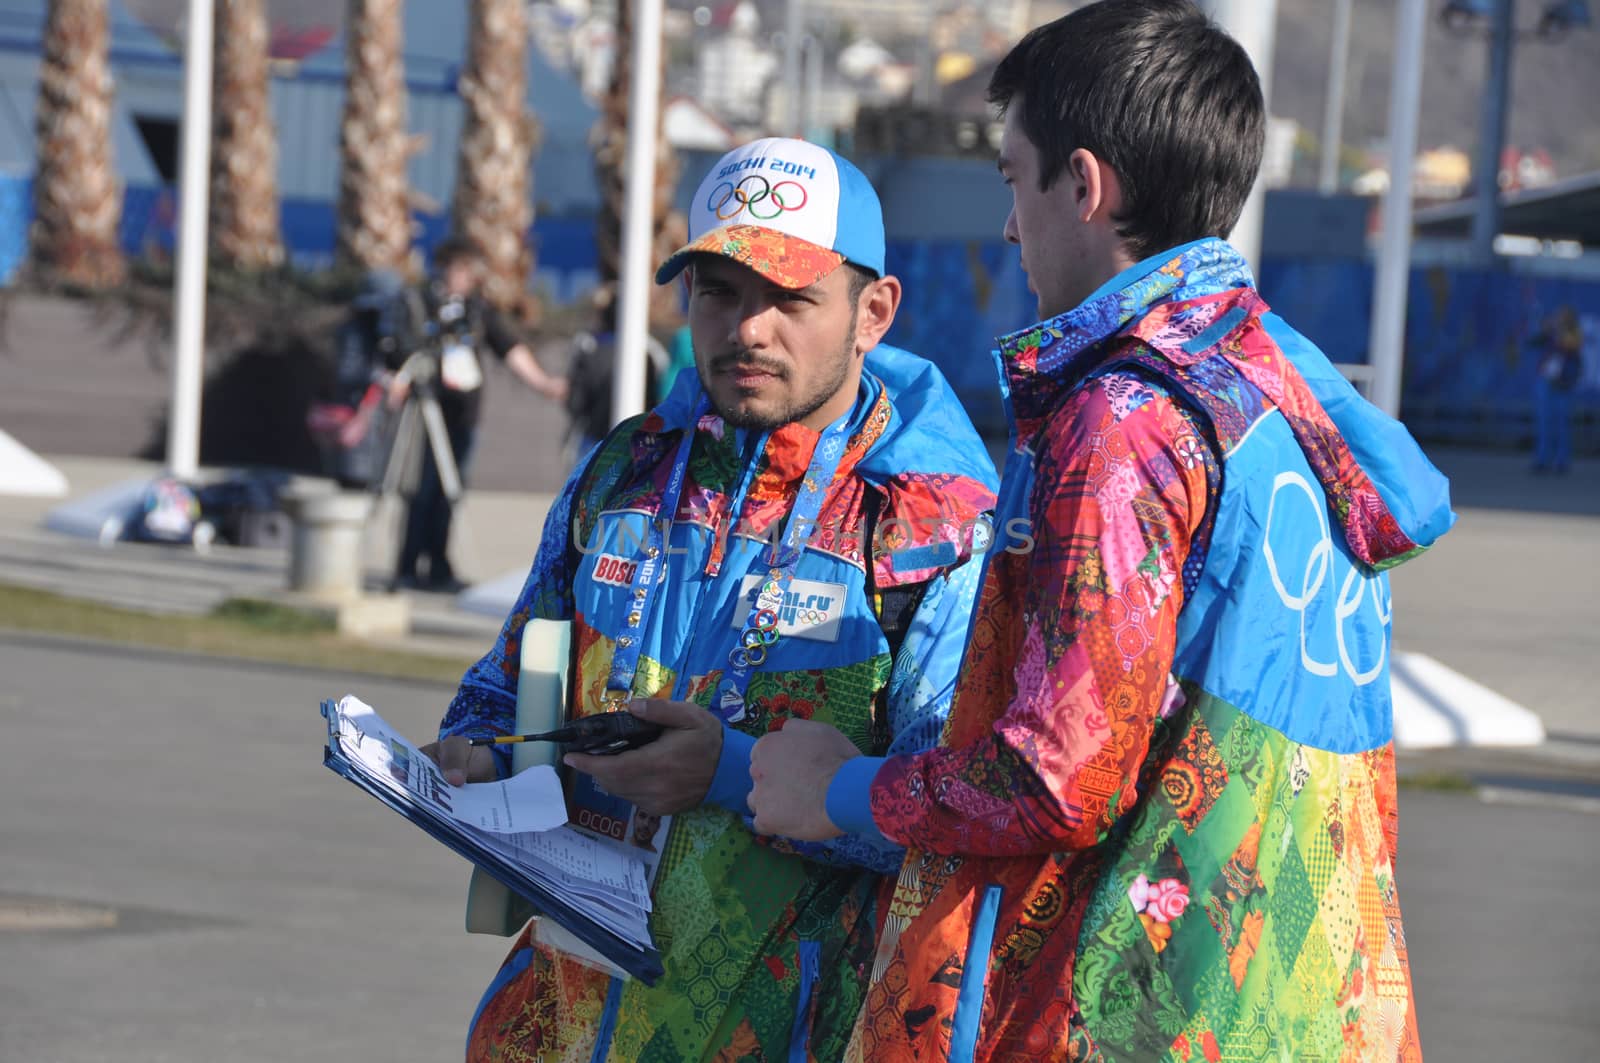 Volunteers at XXII Winter Olympic Games Sochi 2014 by danemo